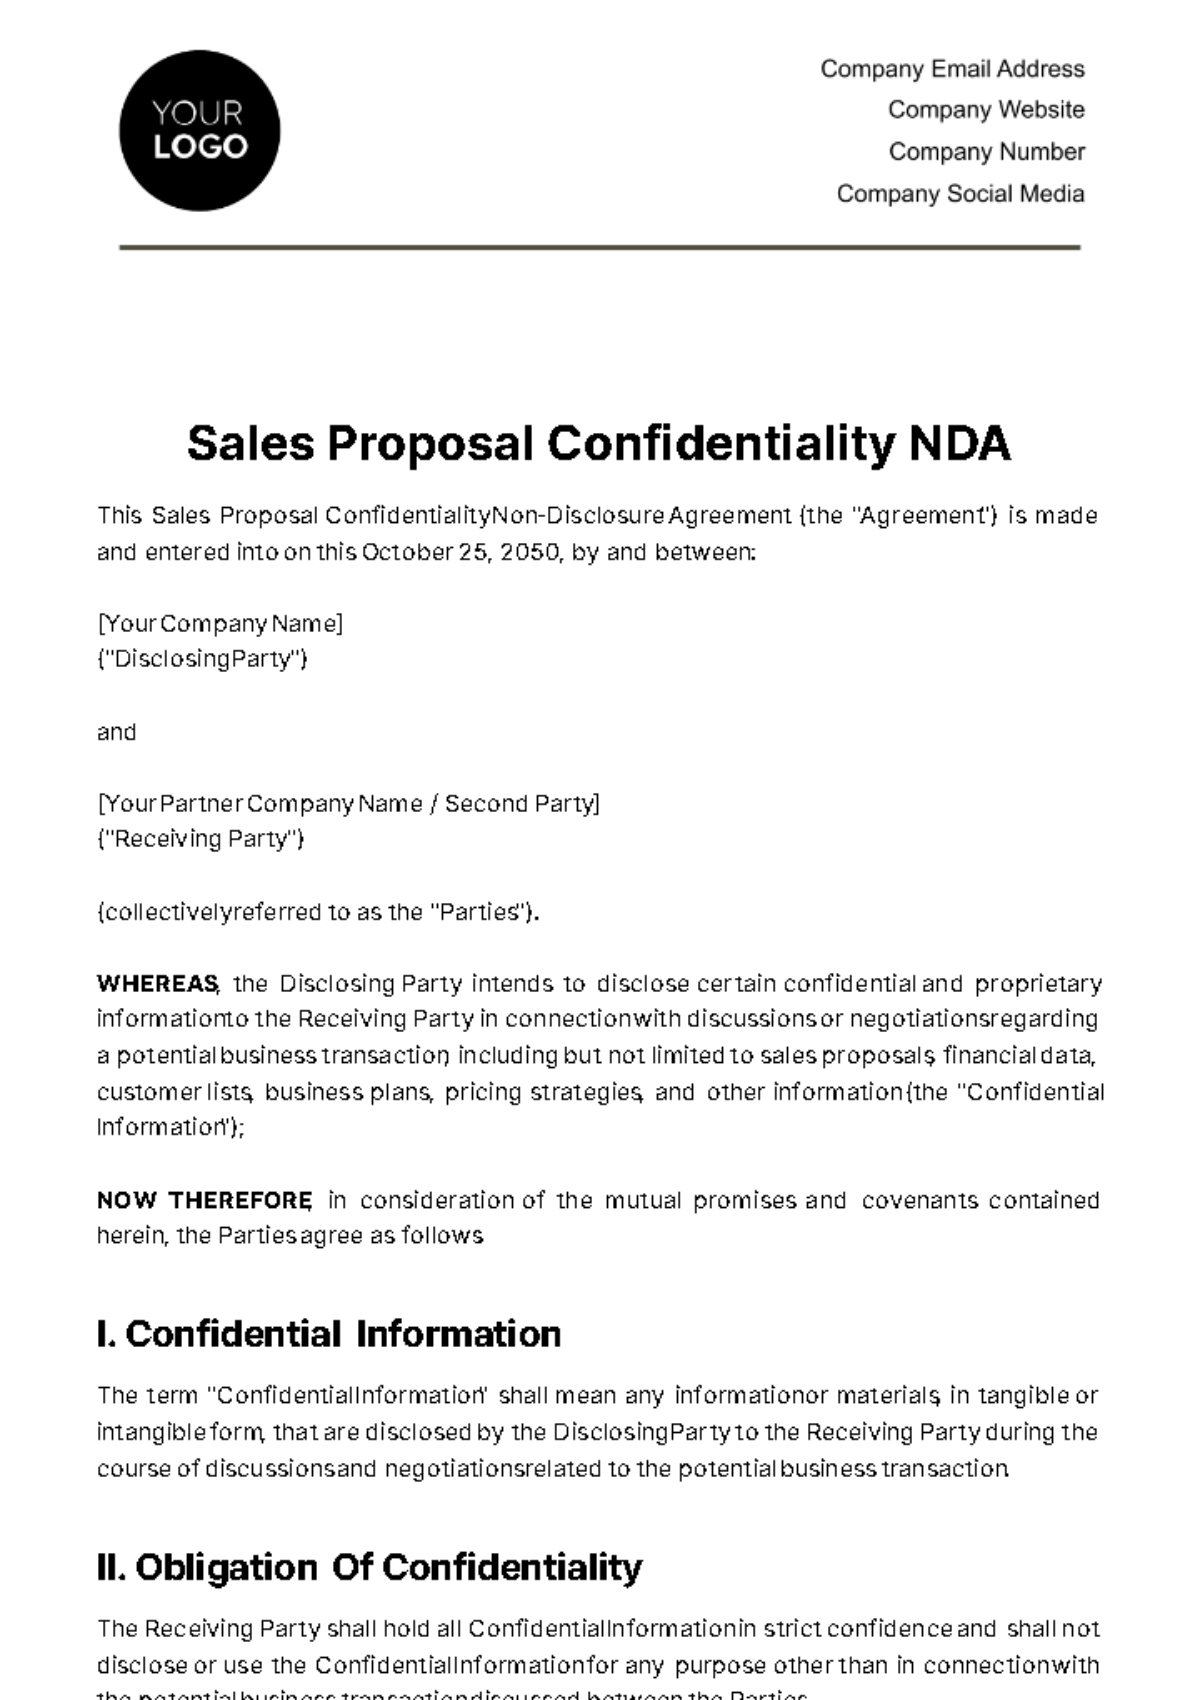 Free Sales Proposal Confidentiality NDA Template